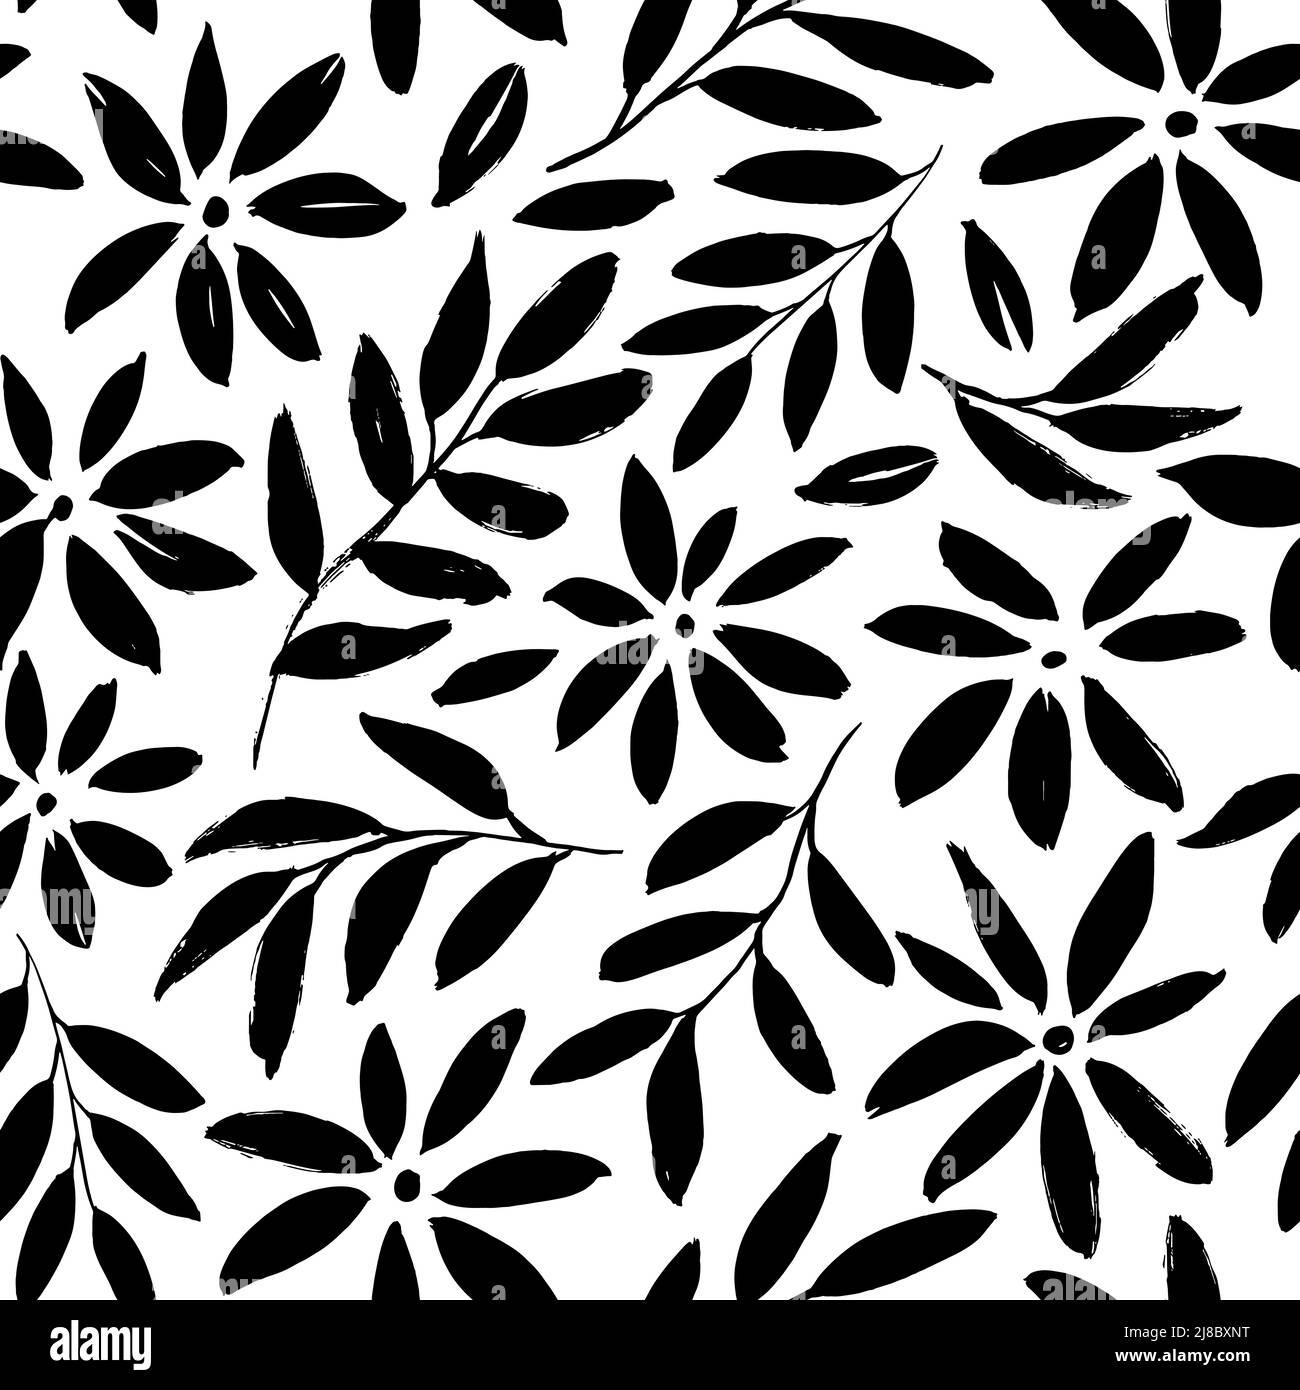 Simple black flowers hand drawn seamless pattern. Stock Vector